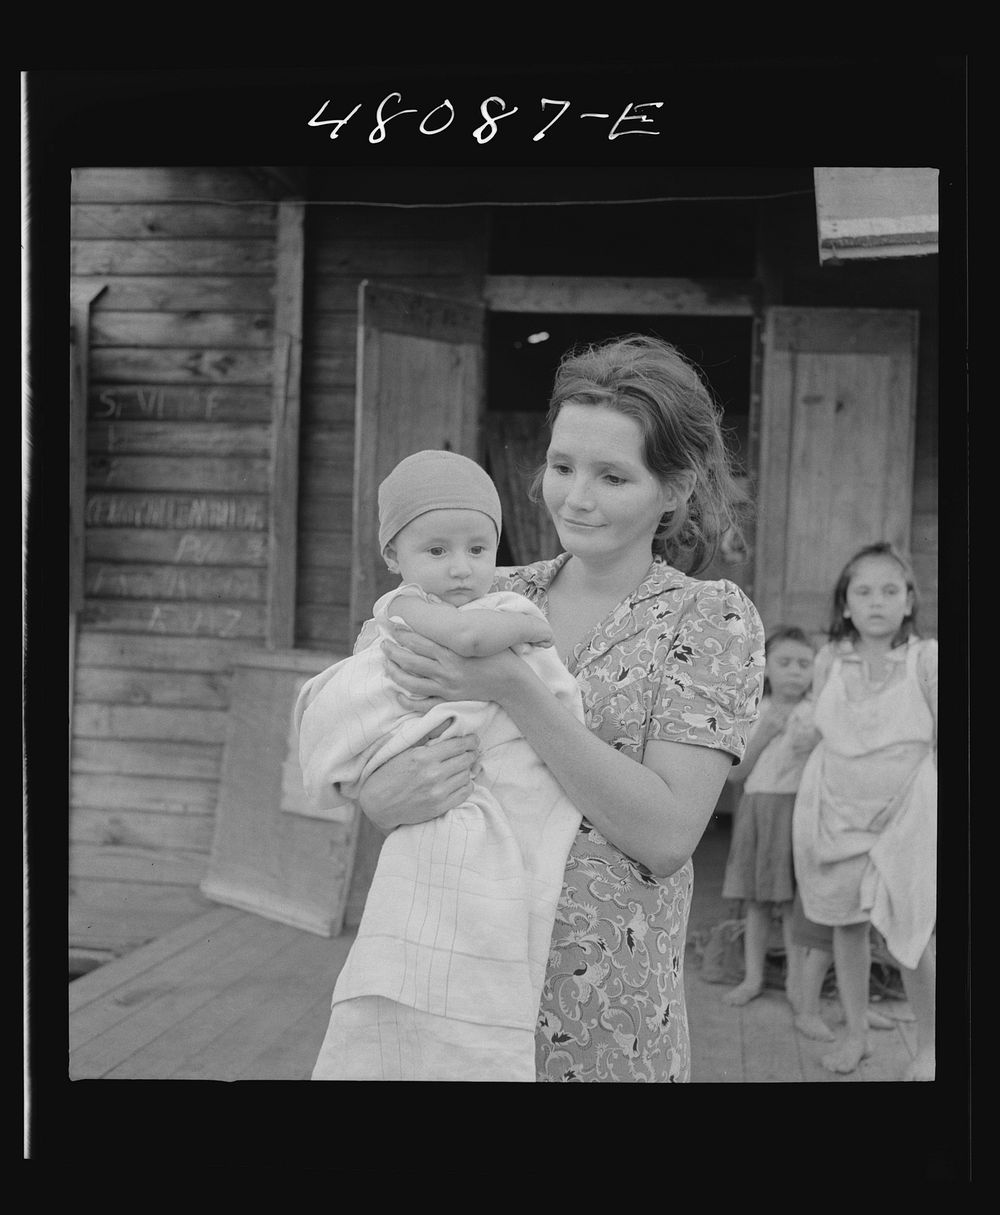 San Juan, Puerto Rico. Mother and child in the slum area known as "El Fangitto". Sourced from the Library of Congress.